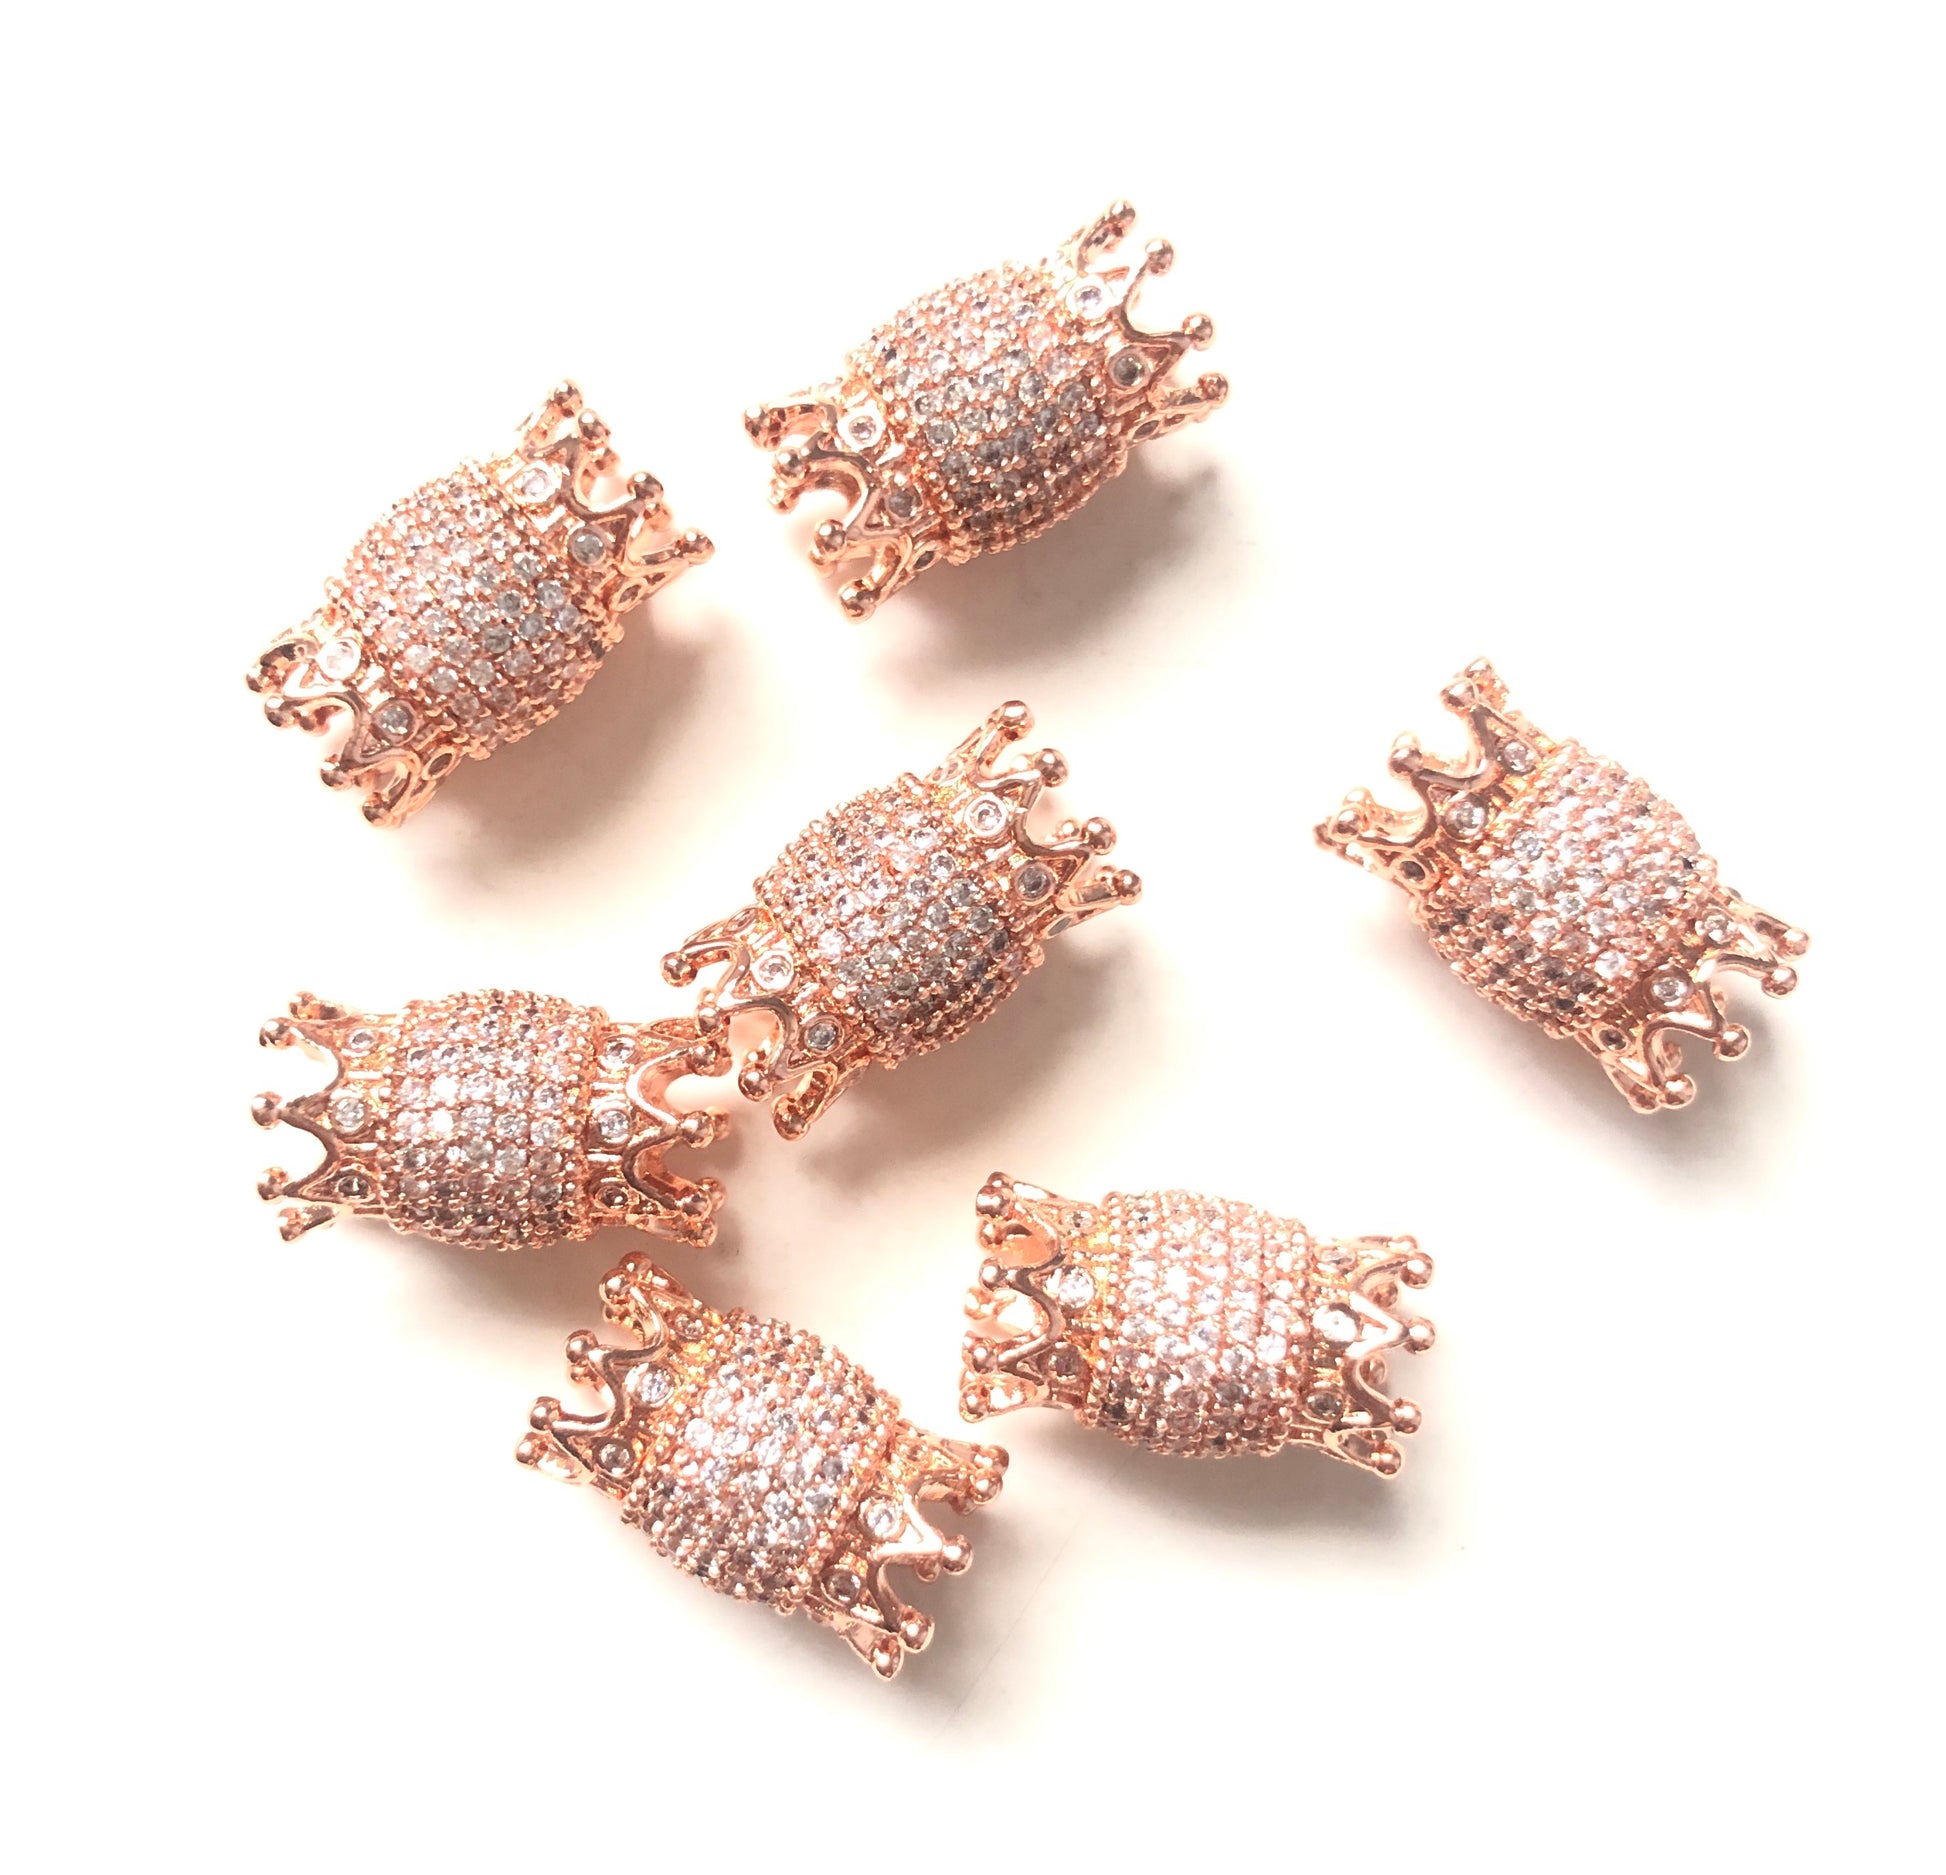 10pcs/lot 16*9mm CZ Paved Double Crown Spacers Rose Gold CZ Paved Spacers Crown Beads Charms Beads Beyond